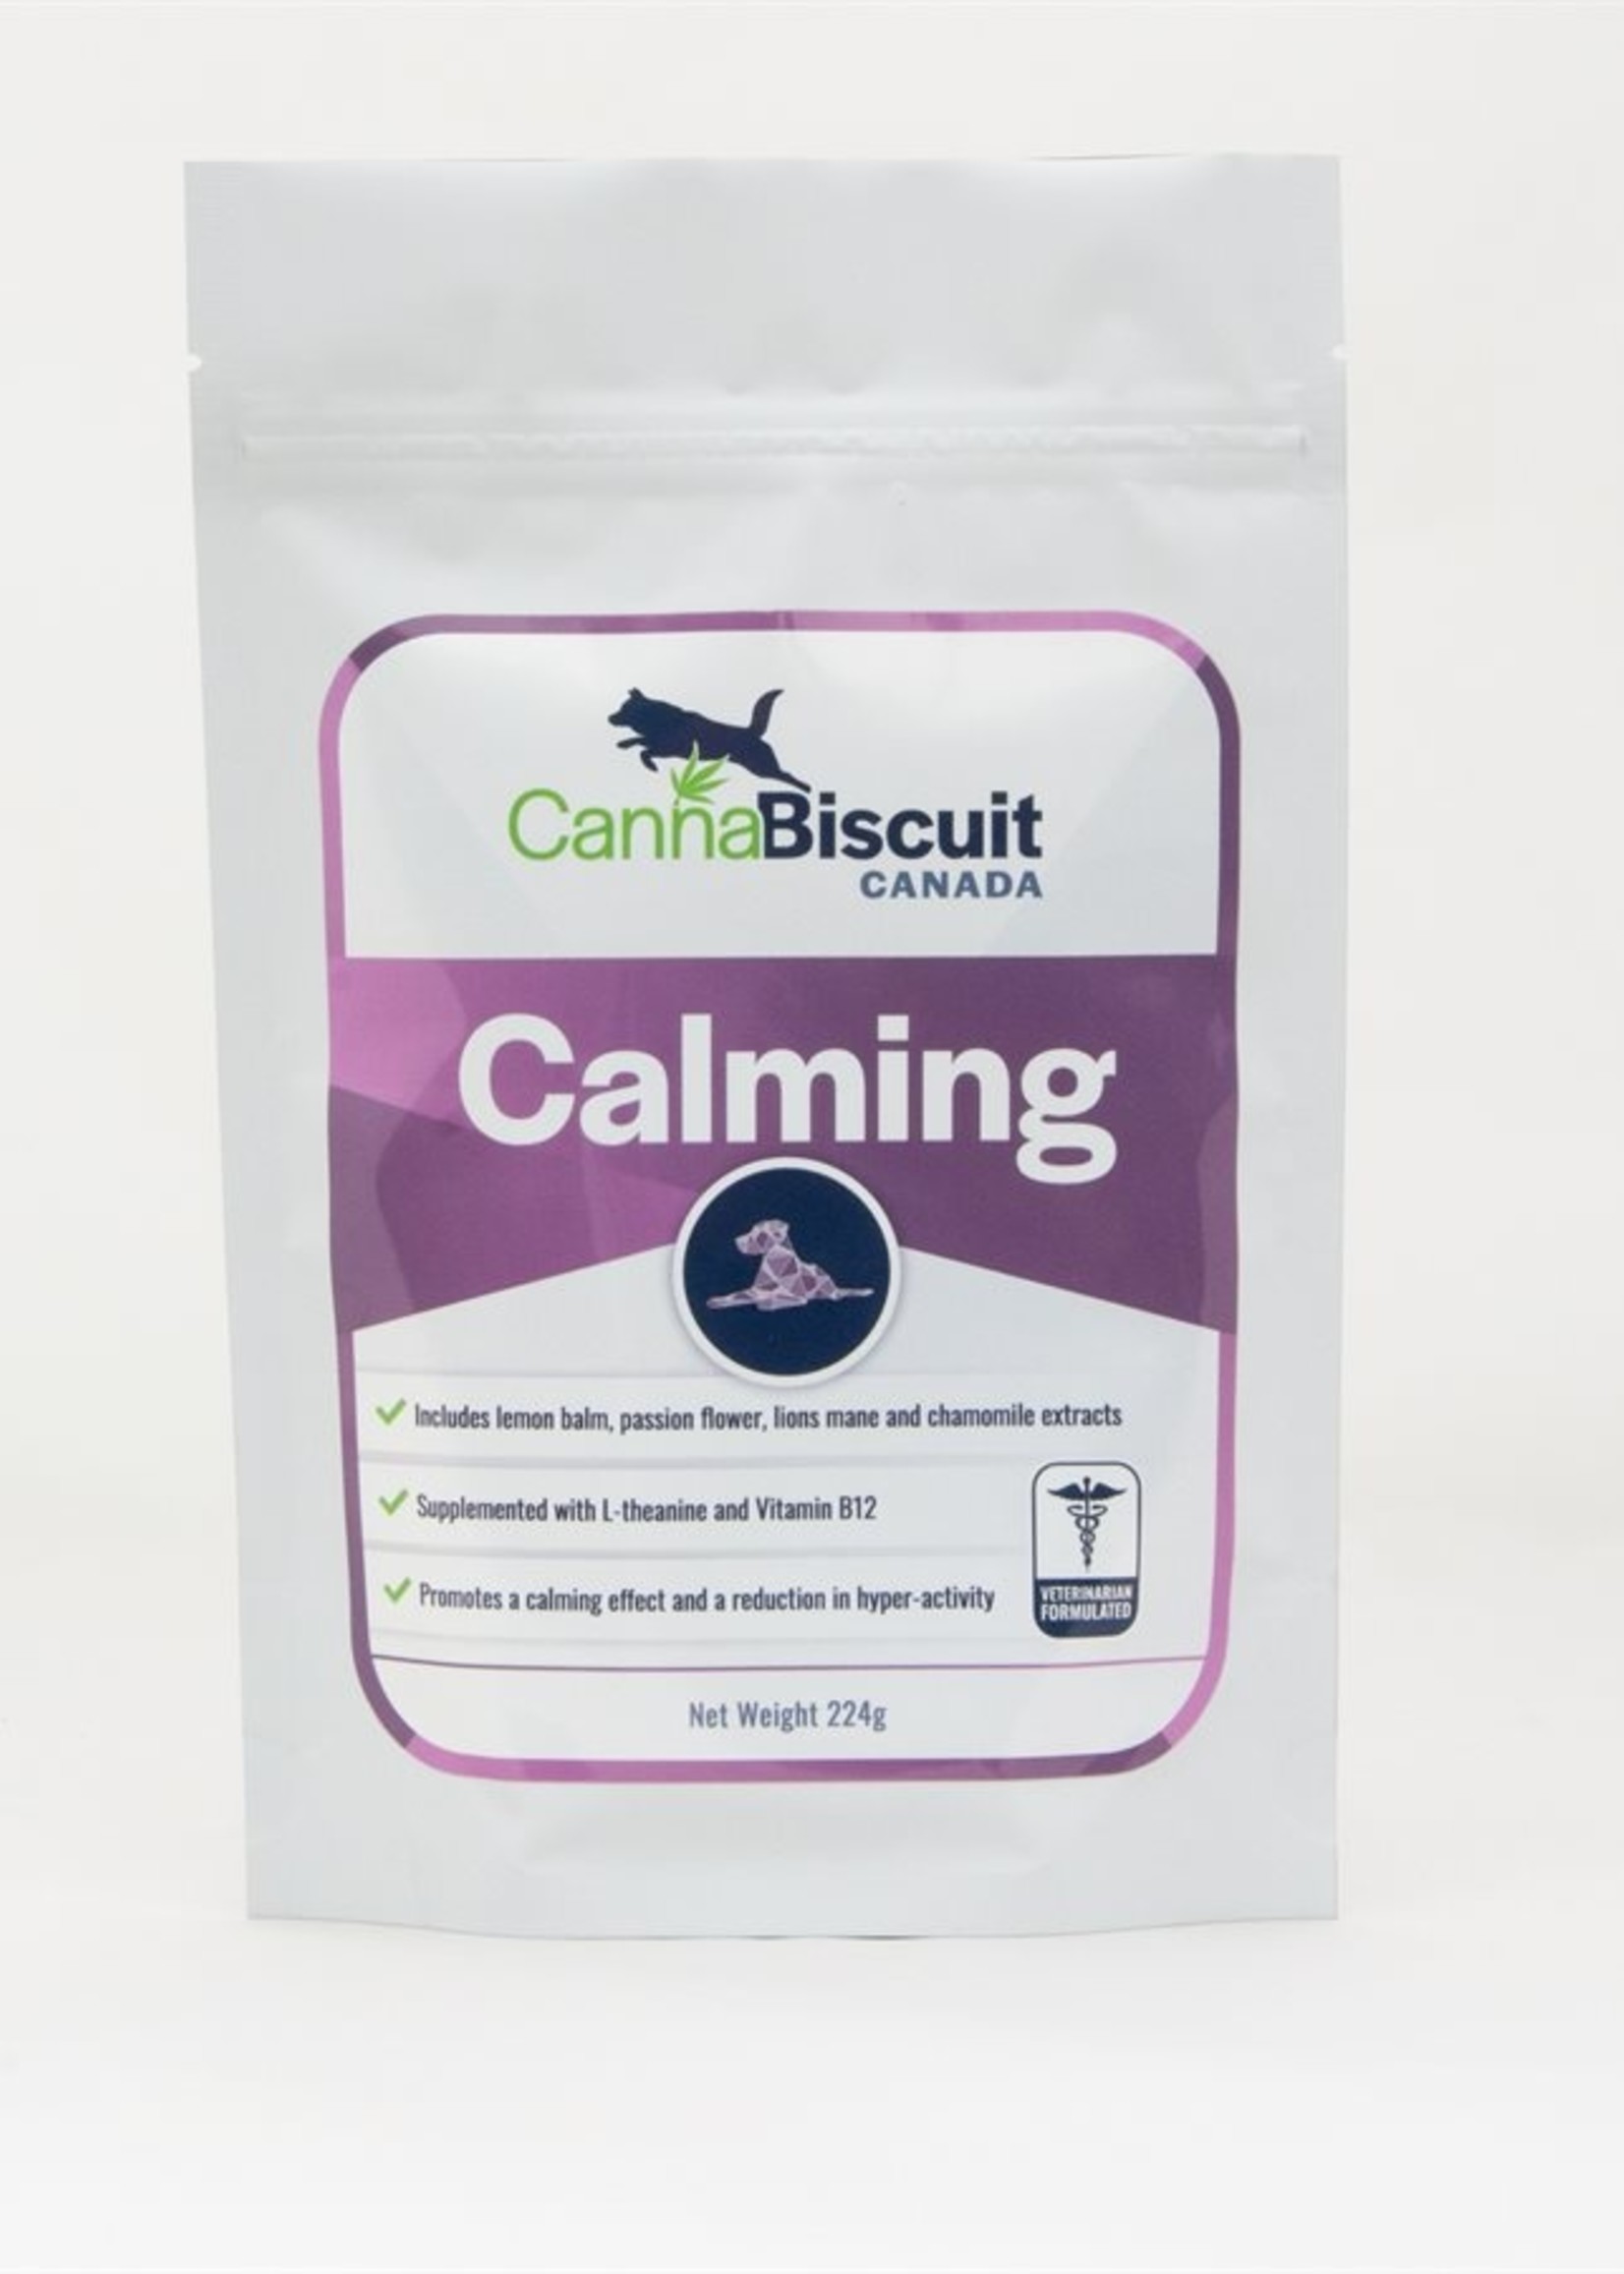 CannaBiscuit Canada CannaBiscuit Calming 225g